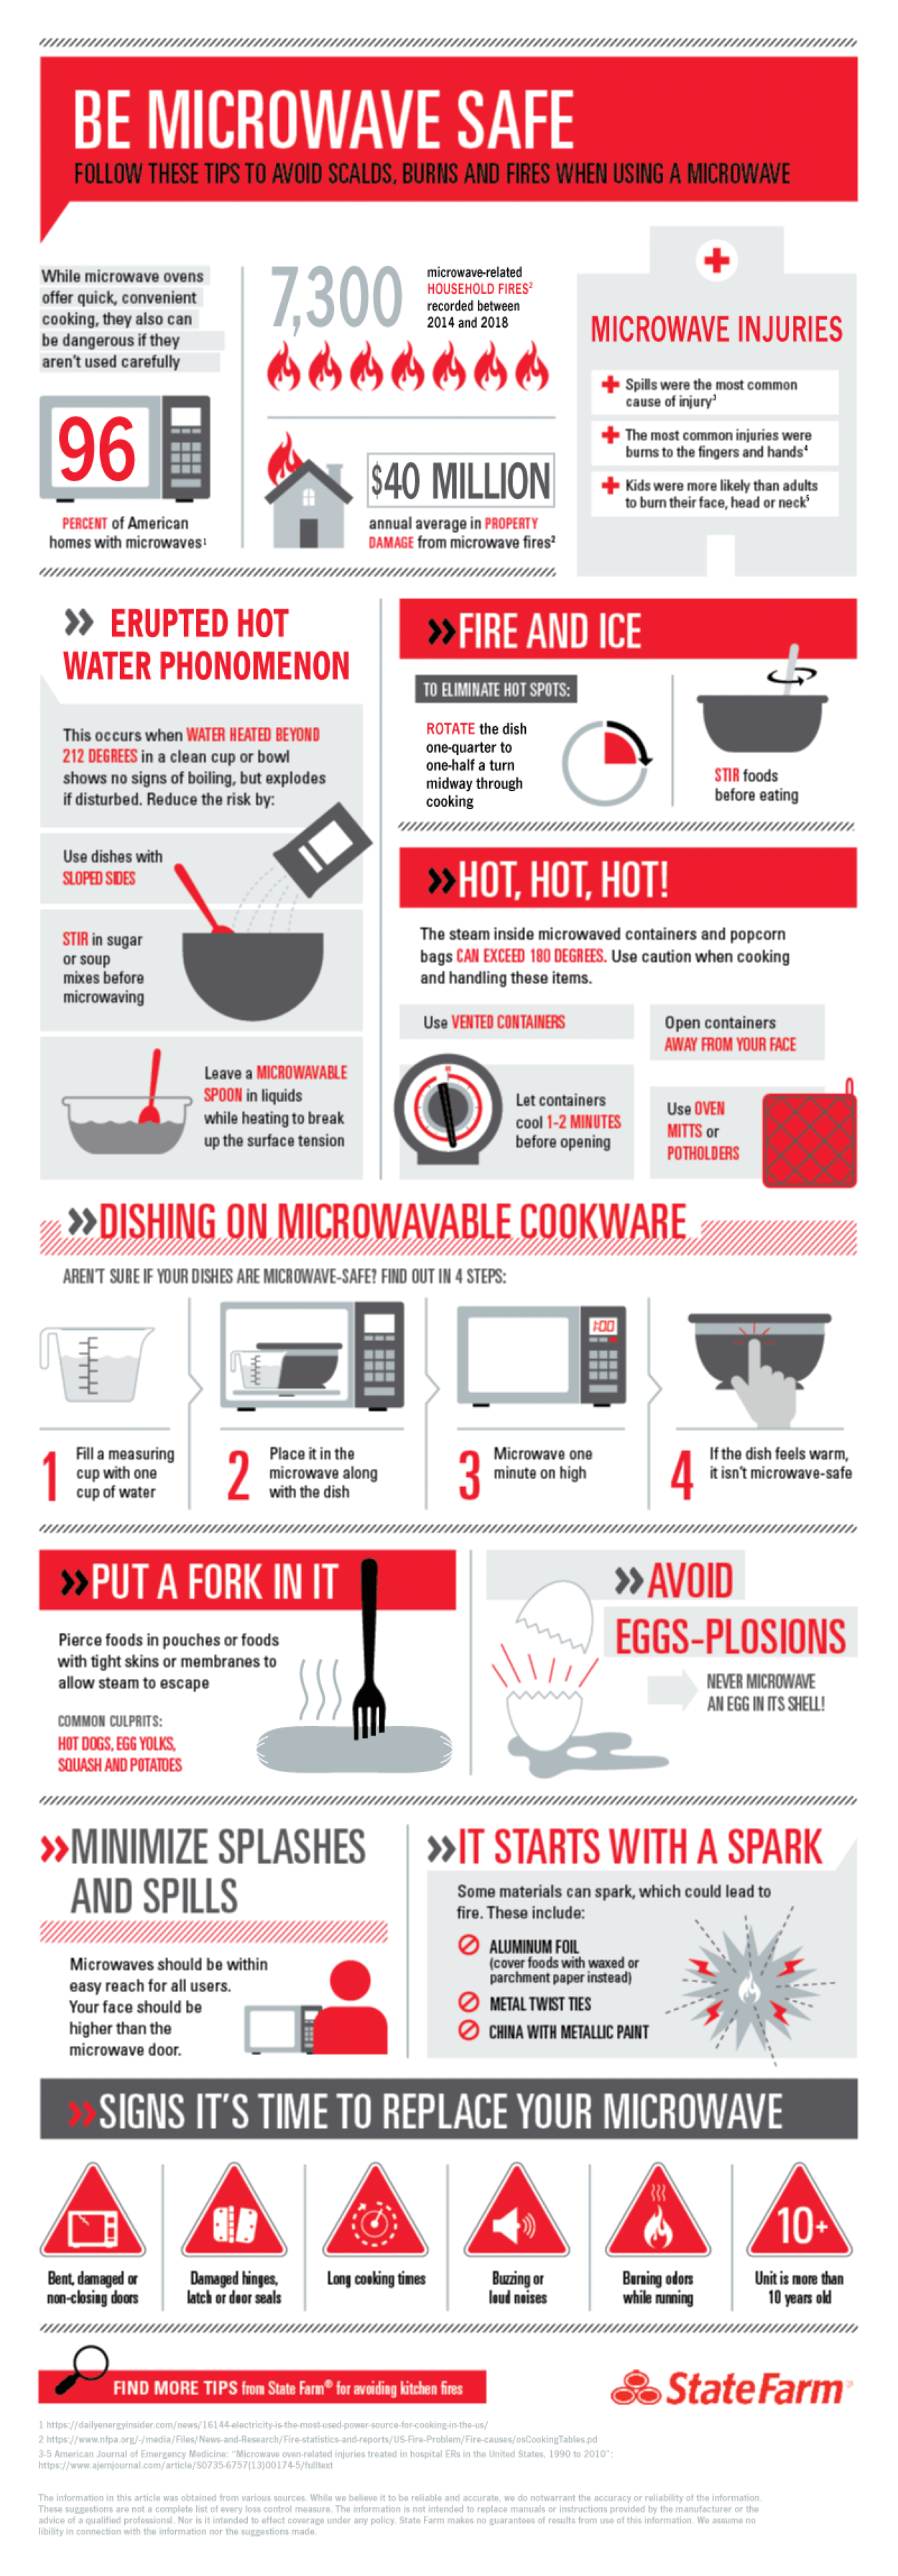 Precautions To Be Mindful Of While Heating Food In Microwave